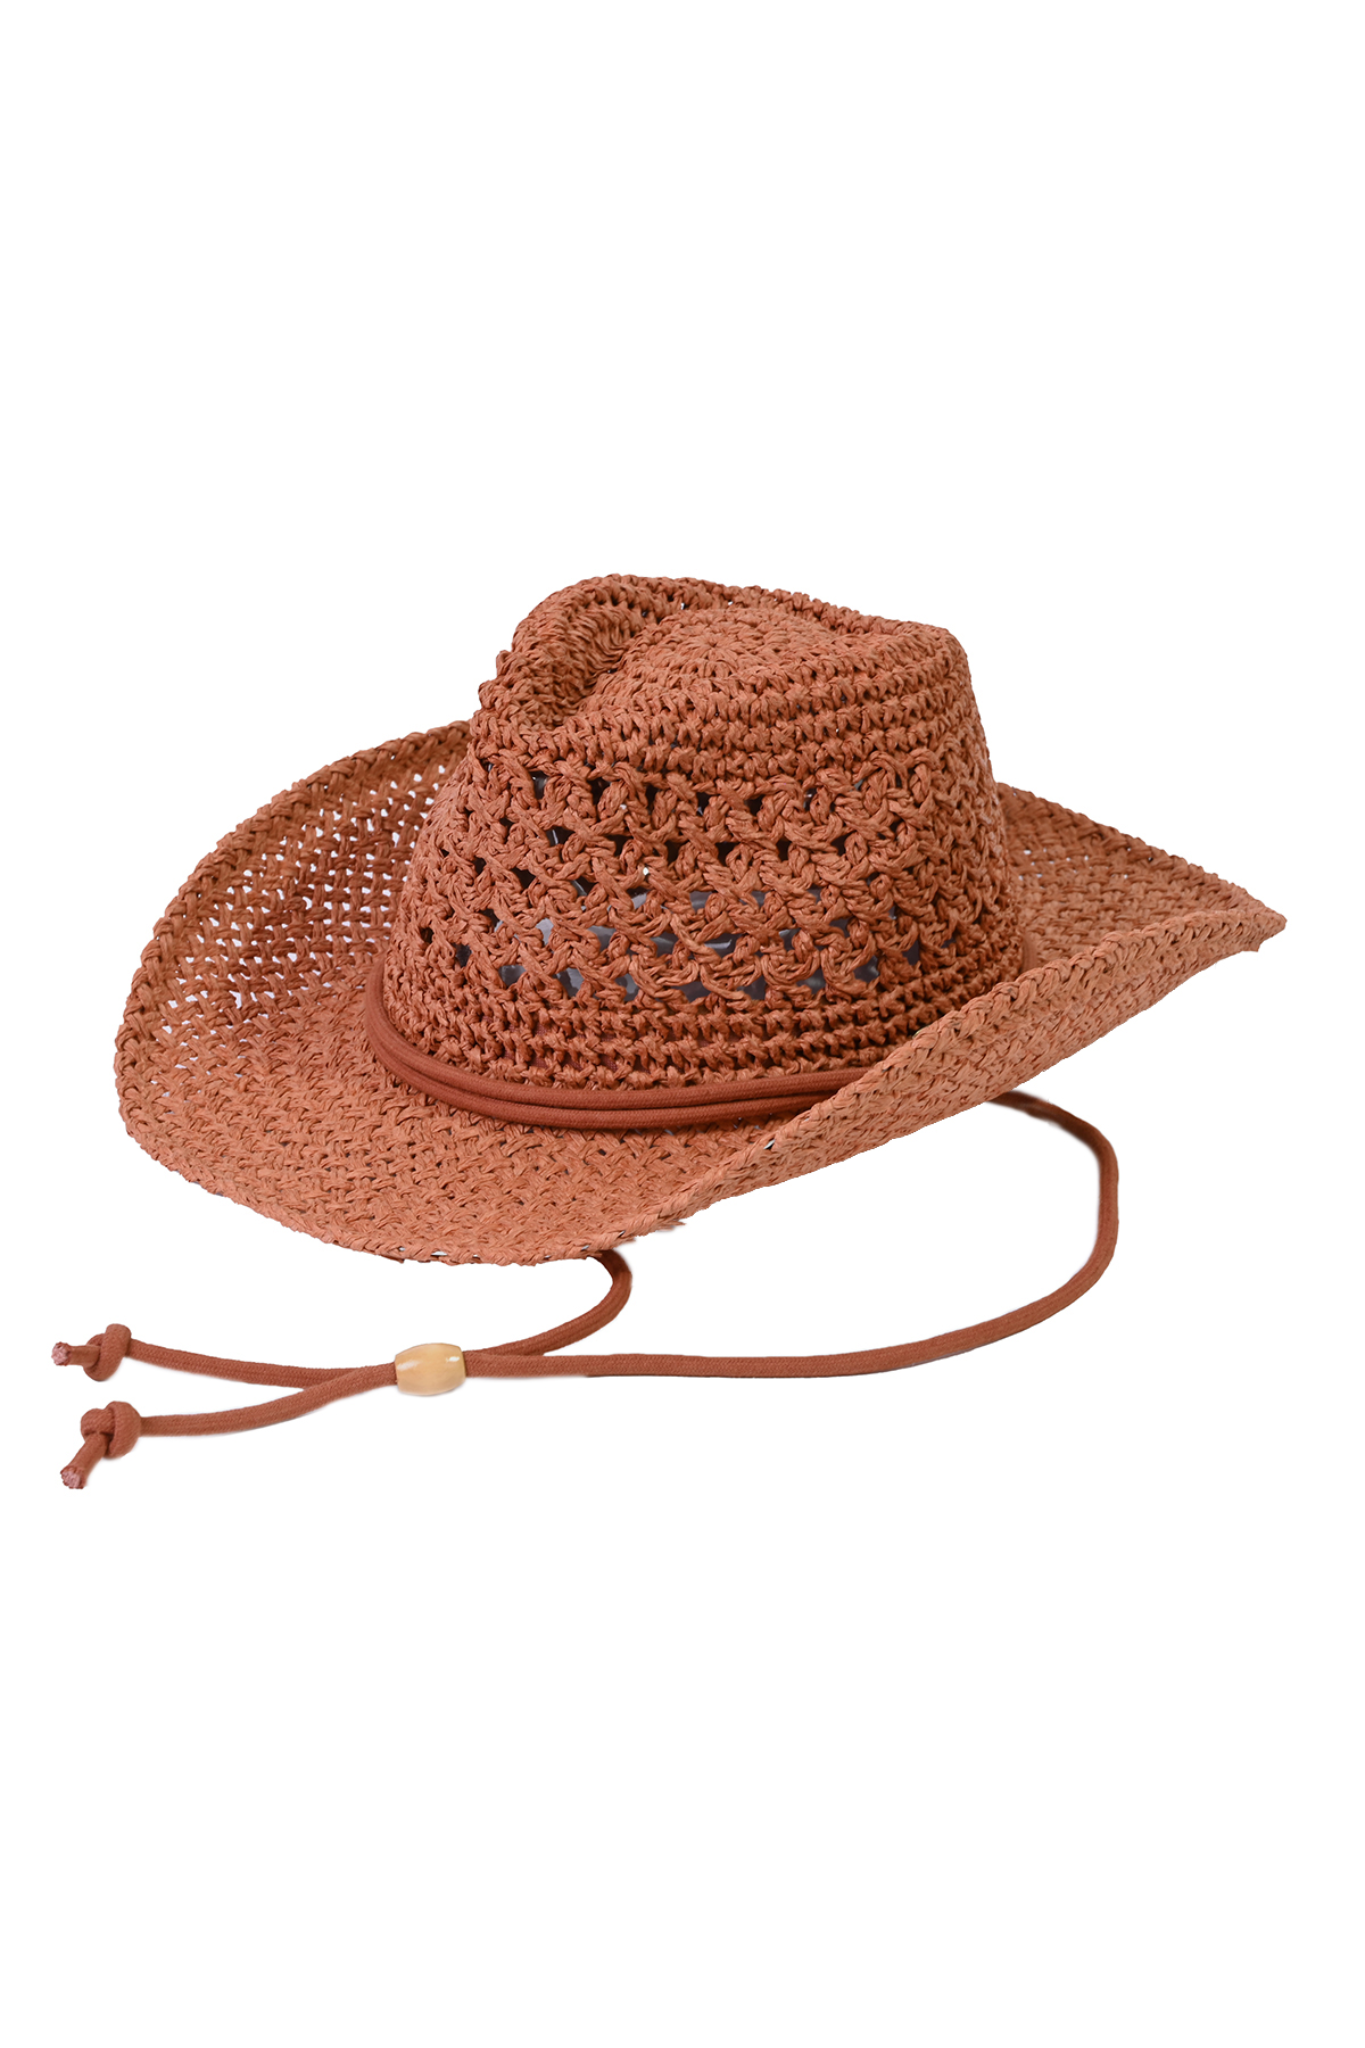 View 2 of Clay Cowboy Hat, a Hats from Larrea Cove. Detail: .